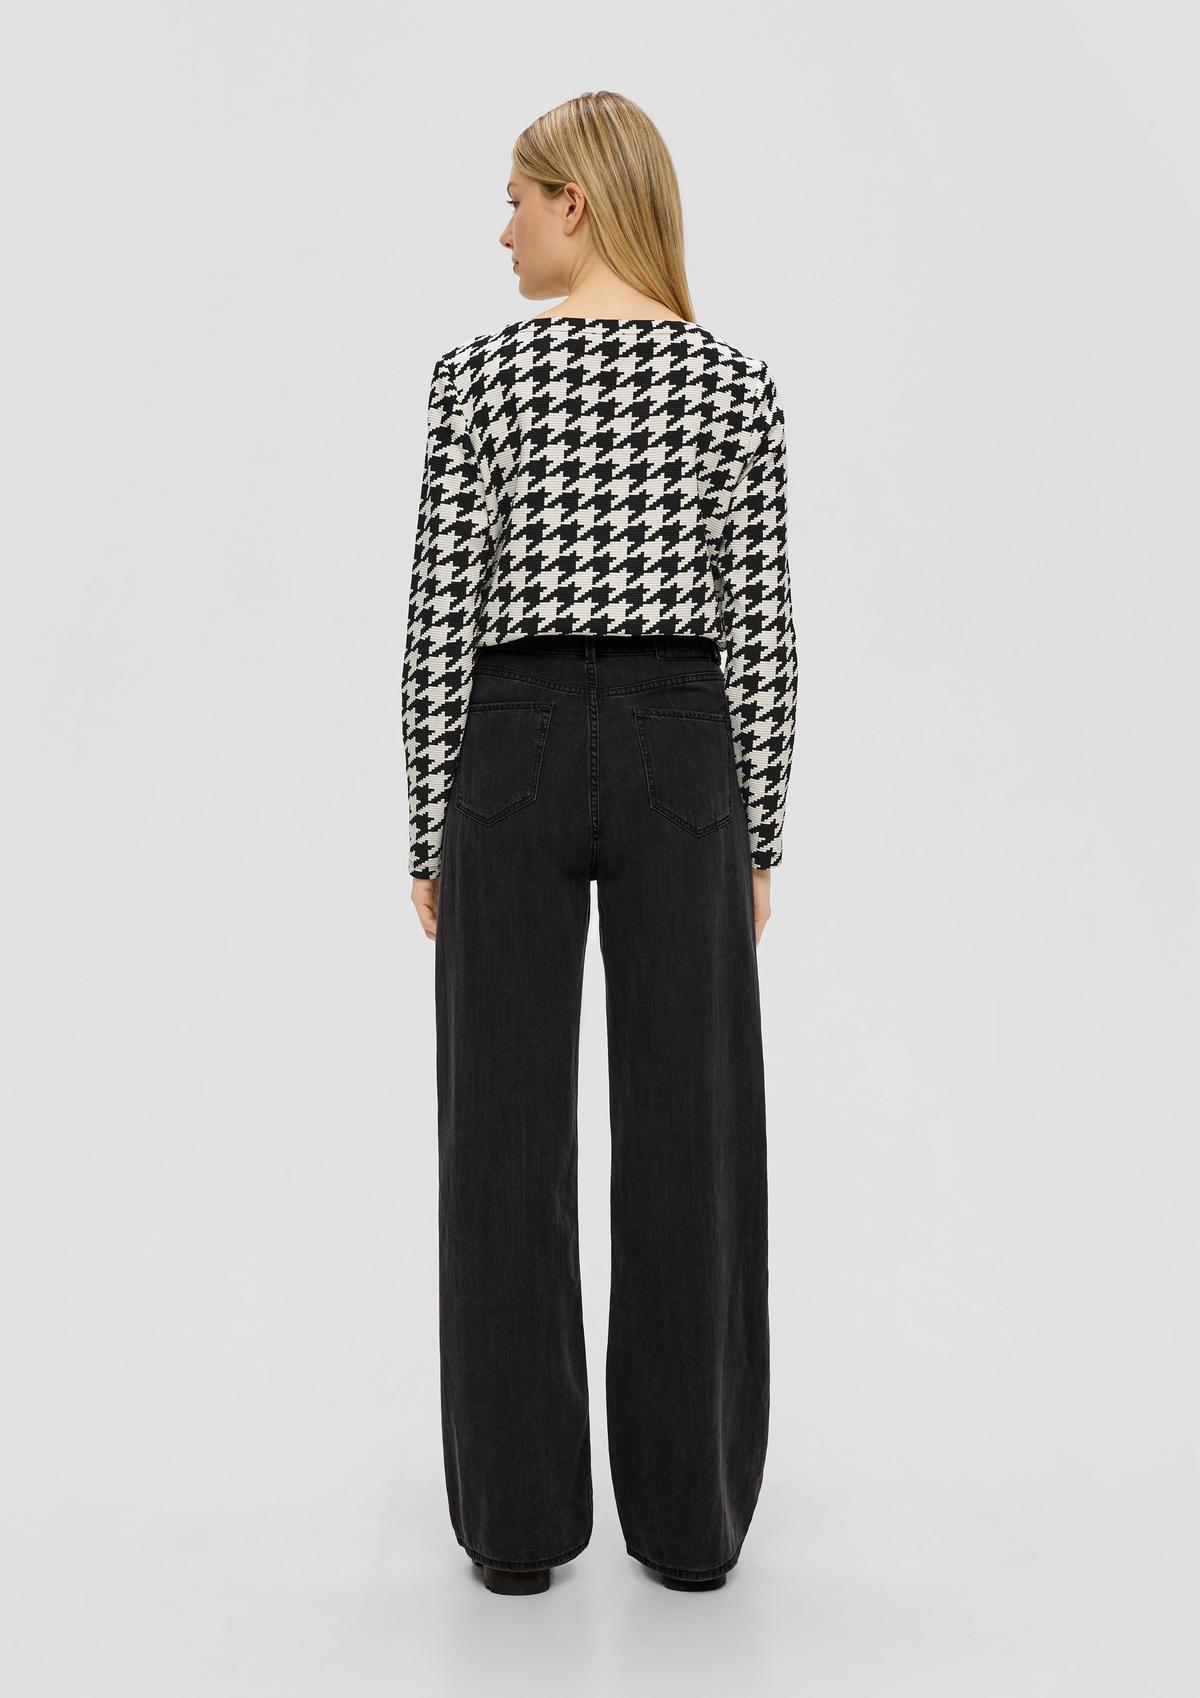 s.Oliver Sweatshirt with a houndstooth pattern